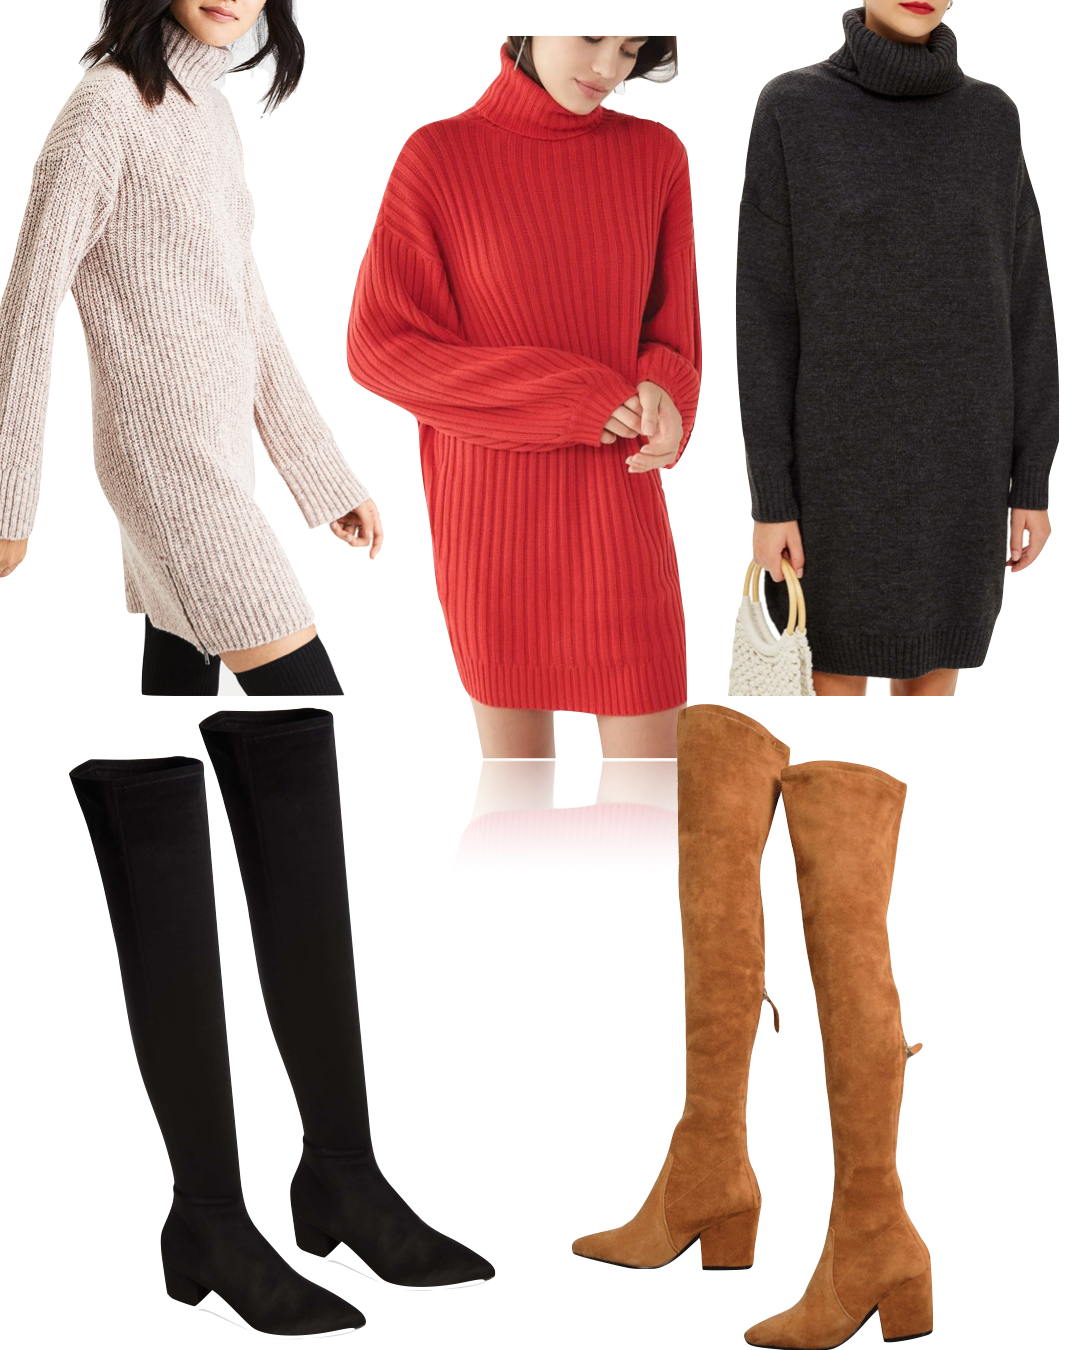 how to wear knee high boots with dresses